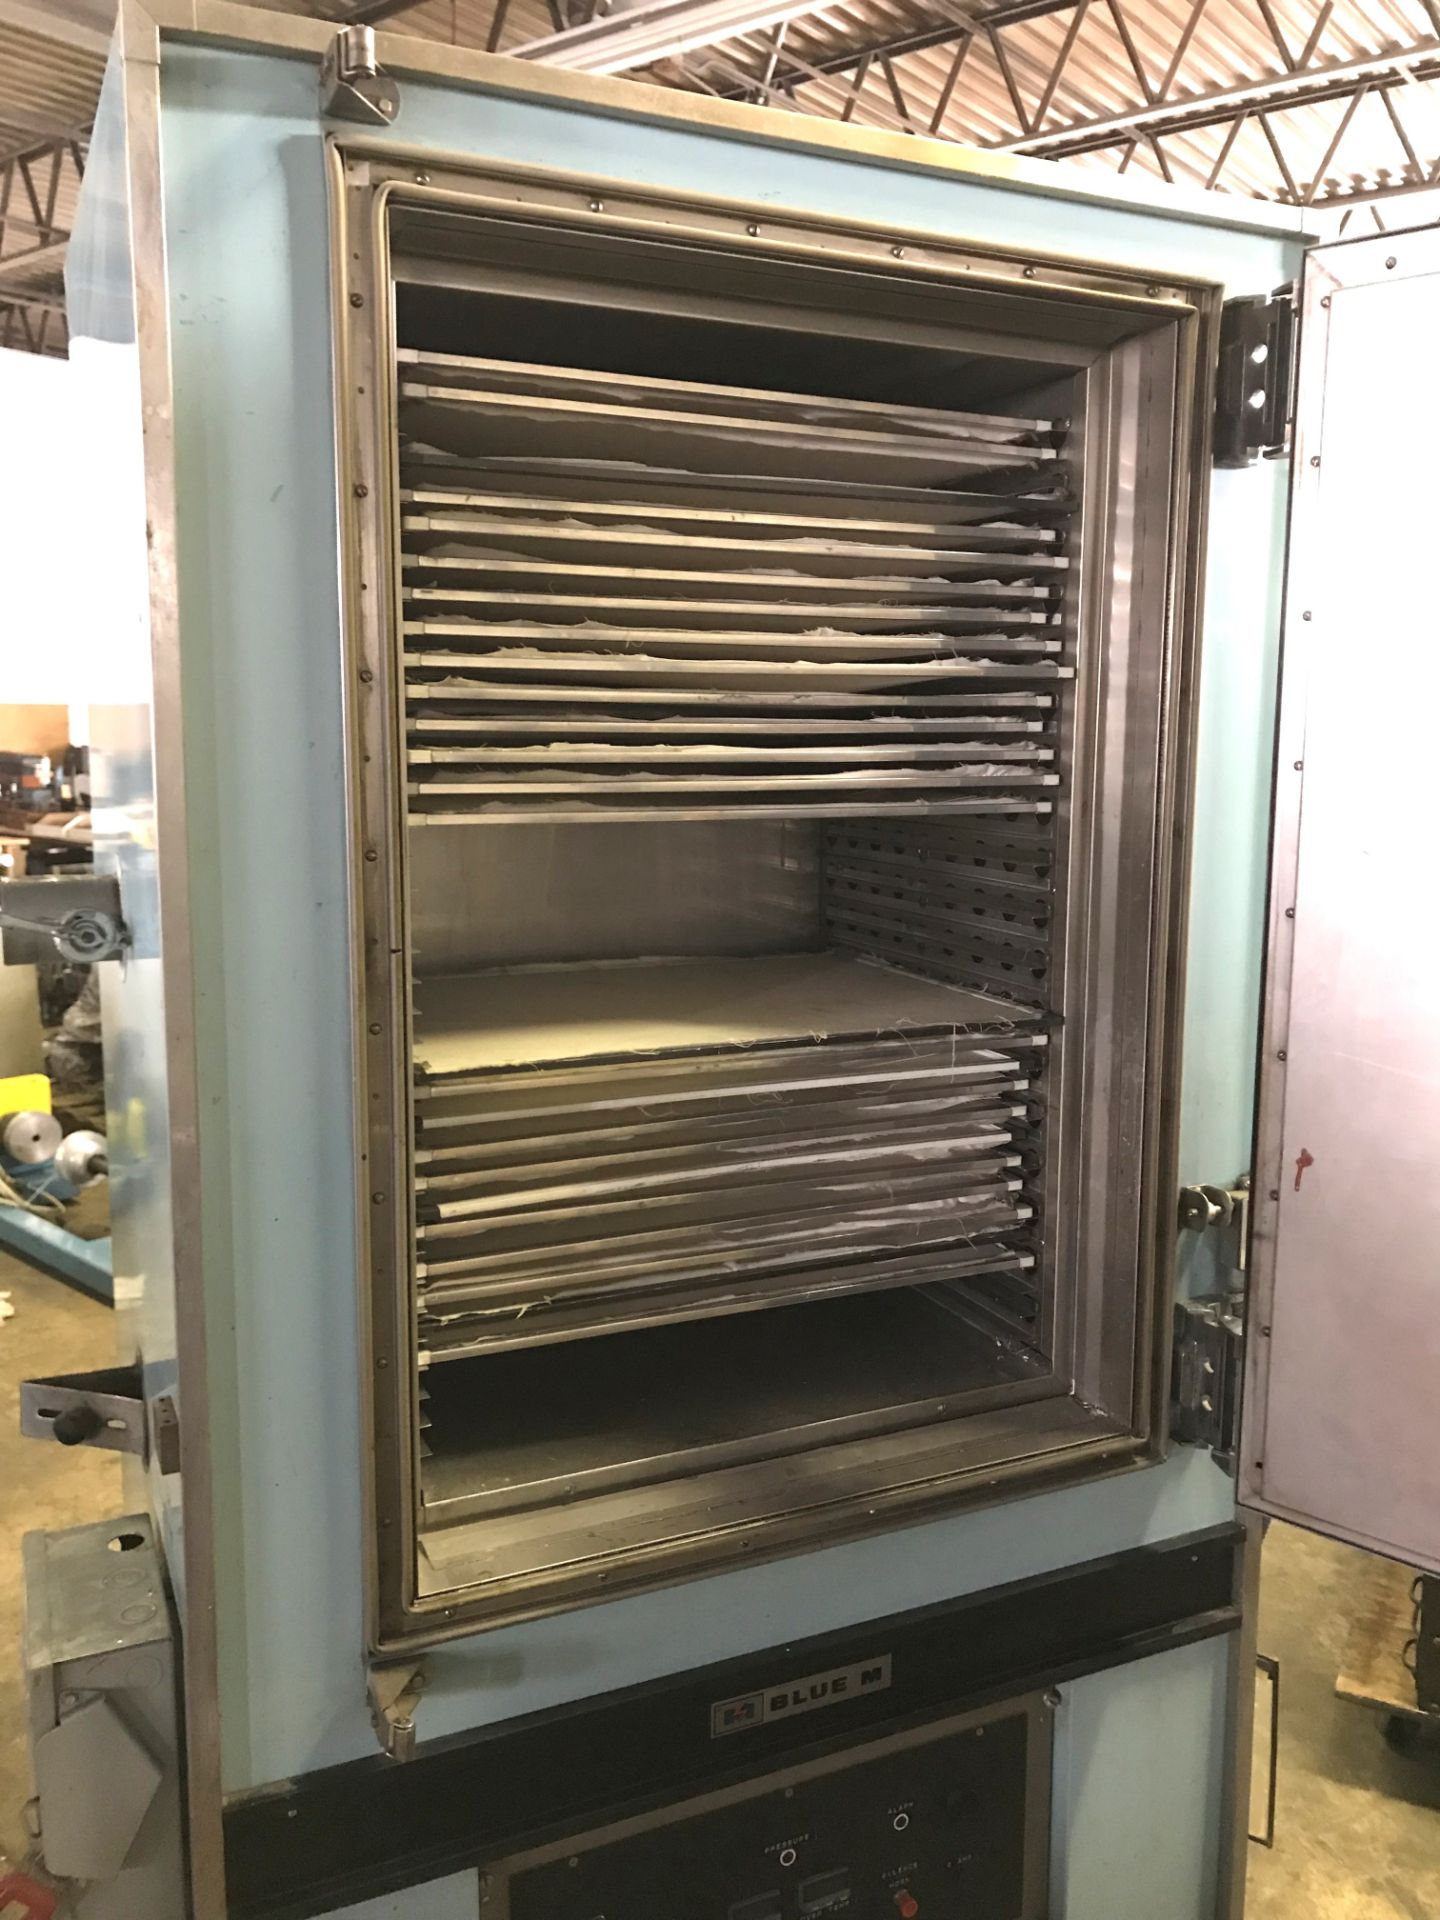 Blue M Curing Oven Mod. 0M7-336G-3 - Image 3 of 4